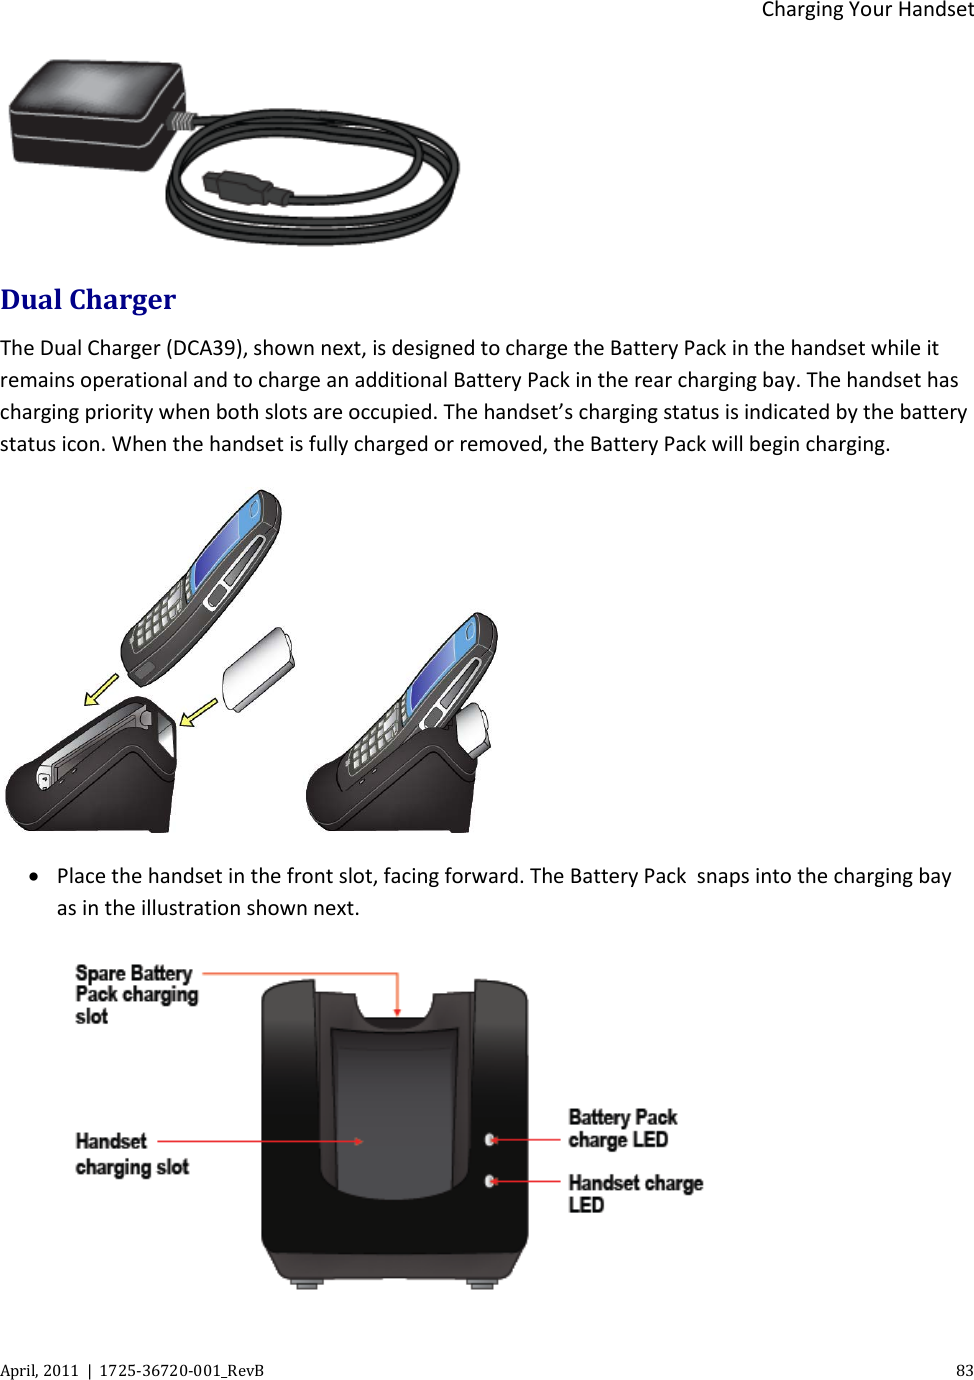  Charging Your Handset April, 2011  |  1725-36720-001_RevB    83   Dual Charger The Dual Charger (DCA39), shown next, is designed to charge the Battery Pack in the handset while it remains operational and to charge an additional Battery Pack in the rear charging bay. The handset has charging priority when both slots are occupied. The handset’s charging status is indicated by the battery status icon. When the handset is fully charged or removed, the Battery Pack will begin charging.  • Place the handset in the front slot, facing forward. The Battery Pack  snaps into the charging bay as in the illustration shown next.  